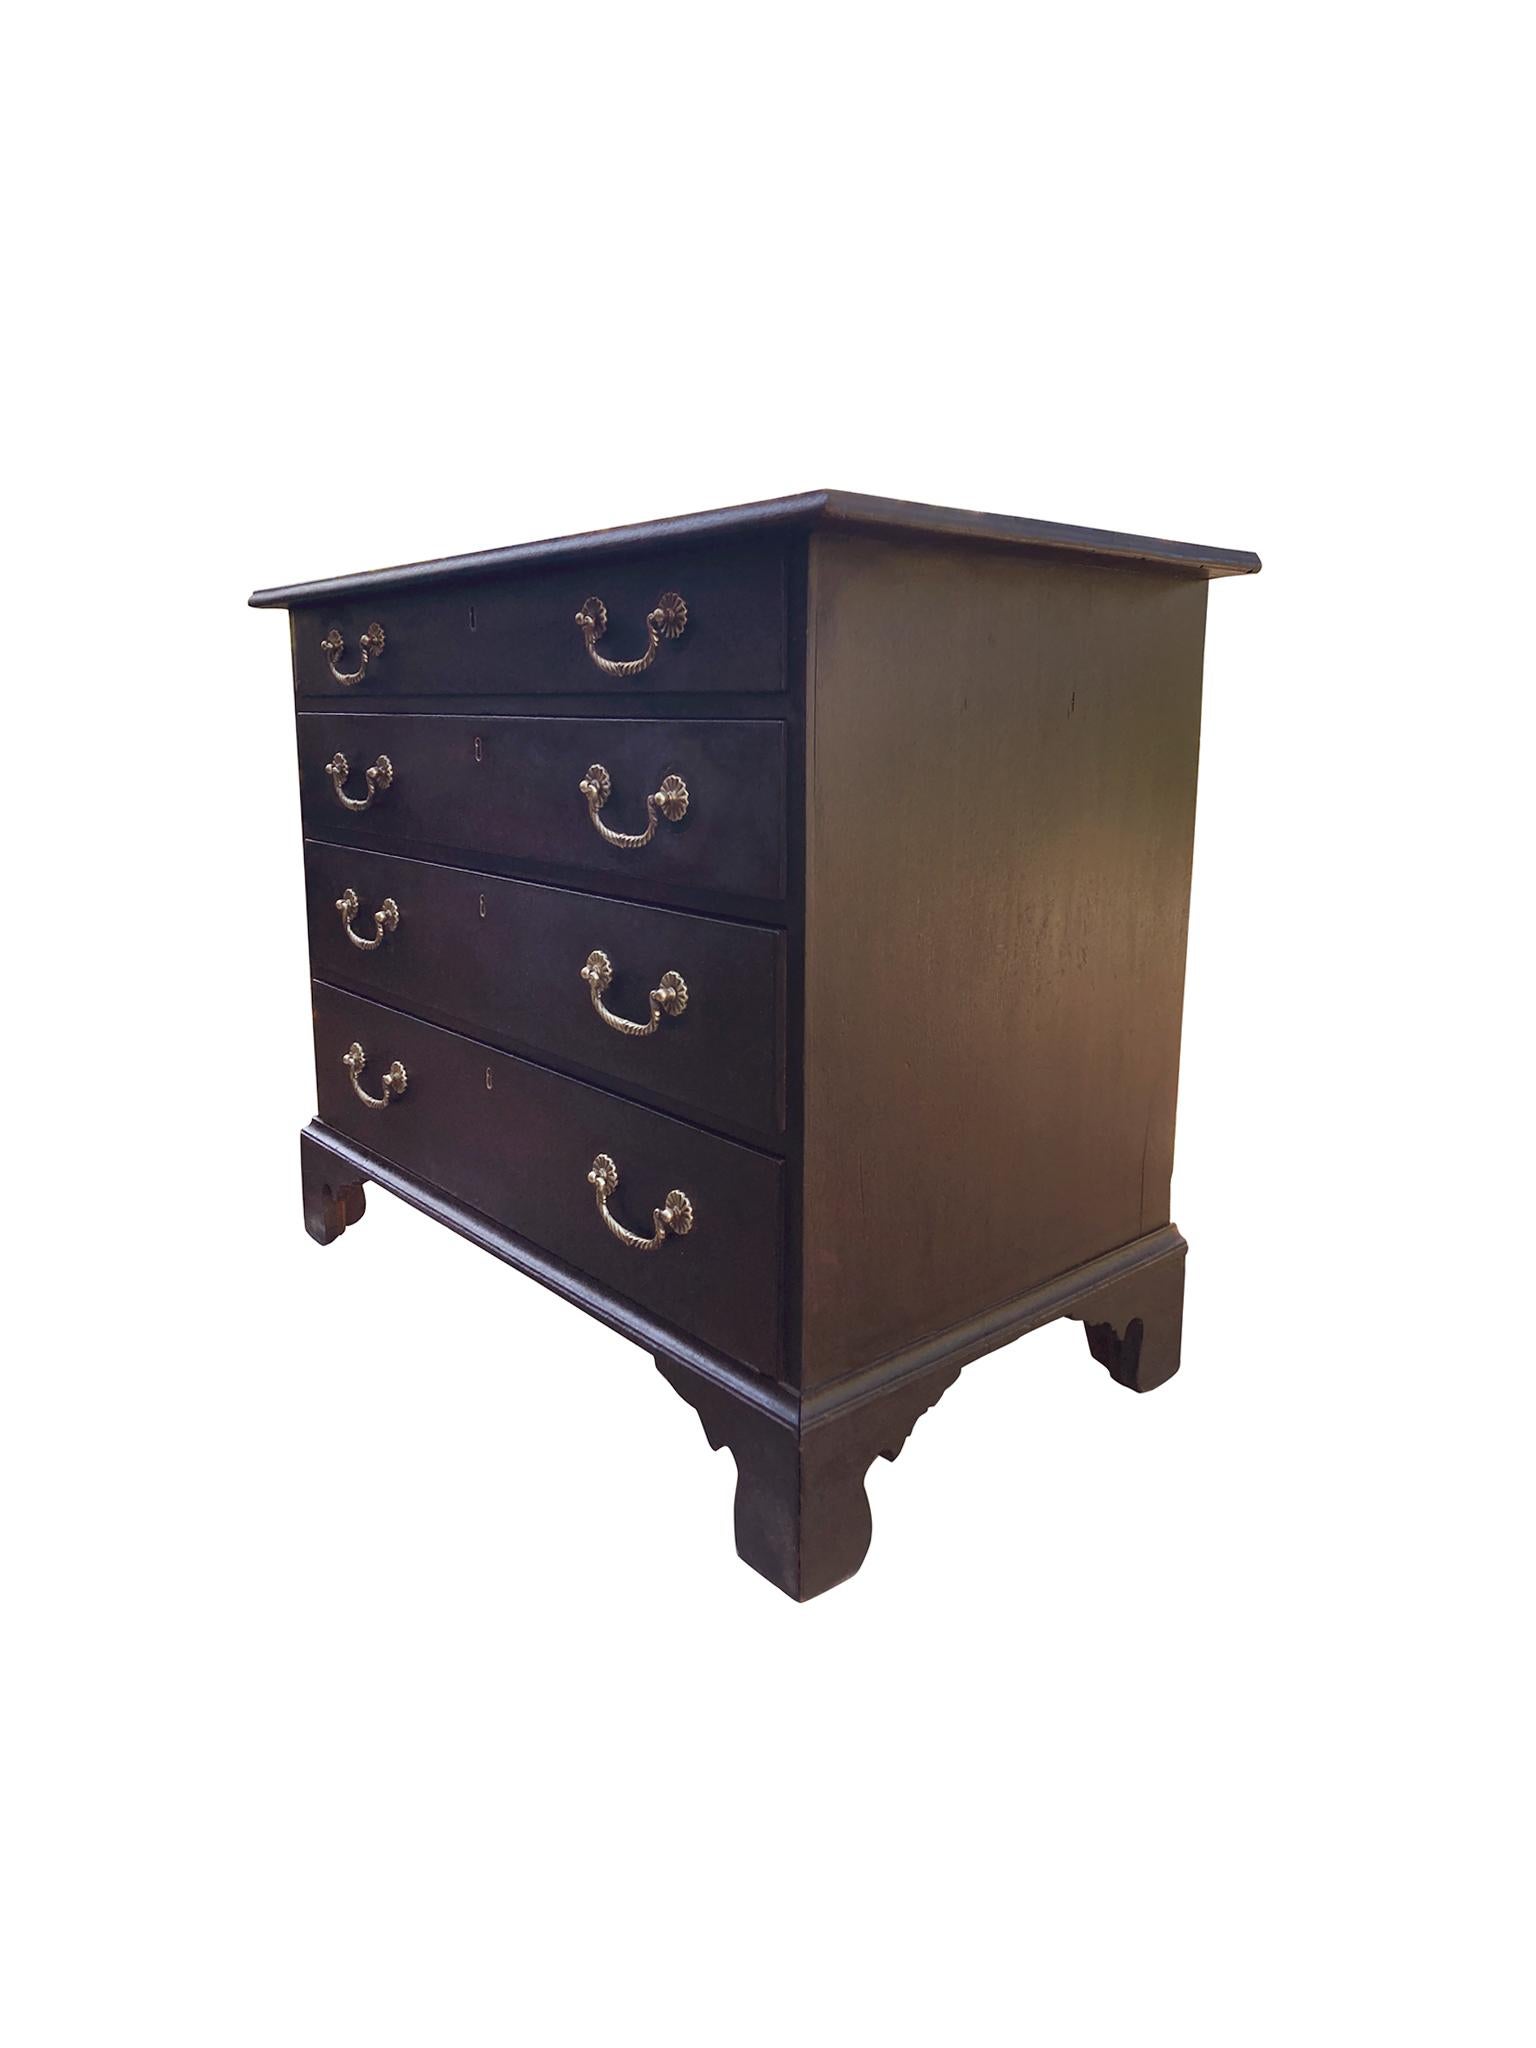 Hand-crafted by the school of cabinetmaker Joseph Short, whose family of carpenters lived in the late 18th and early 19th centuries in Newburyport, Massachusetts. This chest of drawer is mahogany with a dark finish that's accrued a textured patina